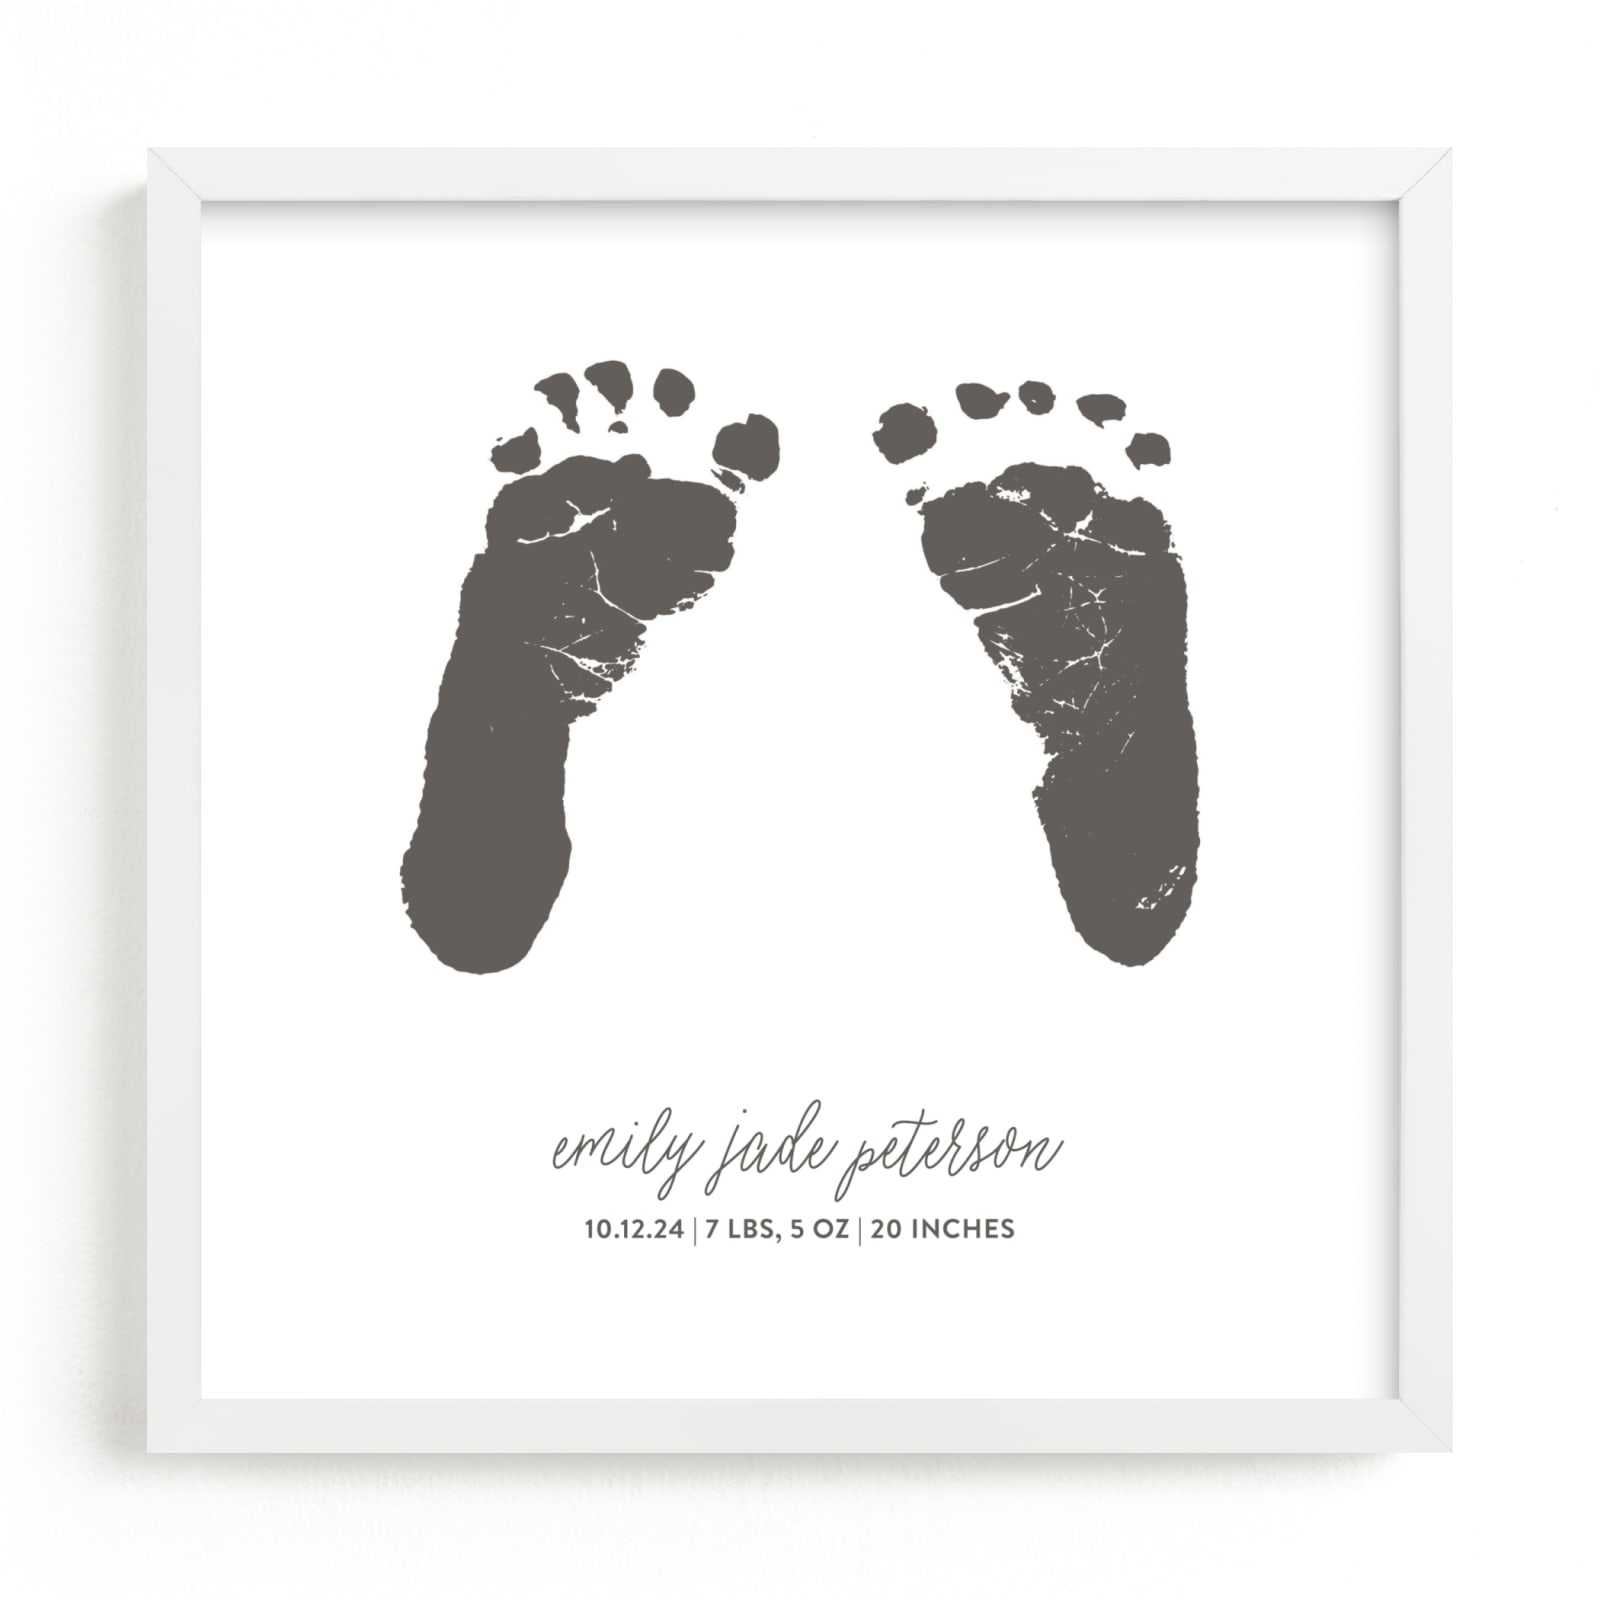 This is a black photos to art by Minted called Custom Footprints Letterpress Art.